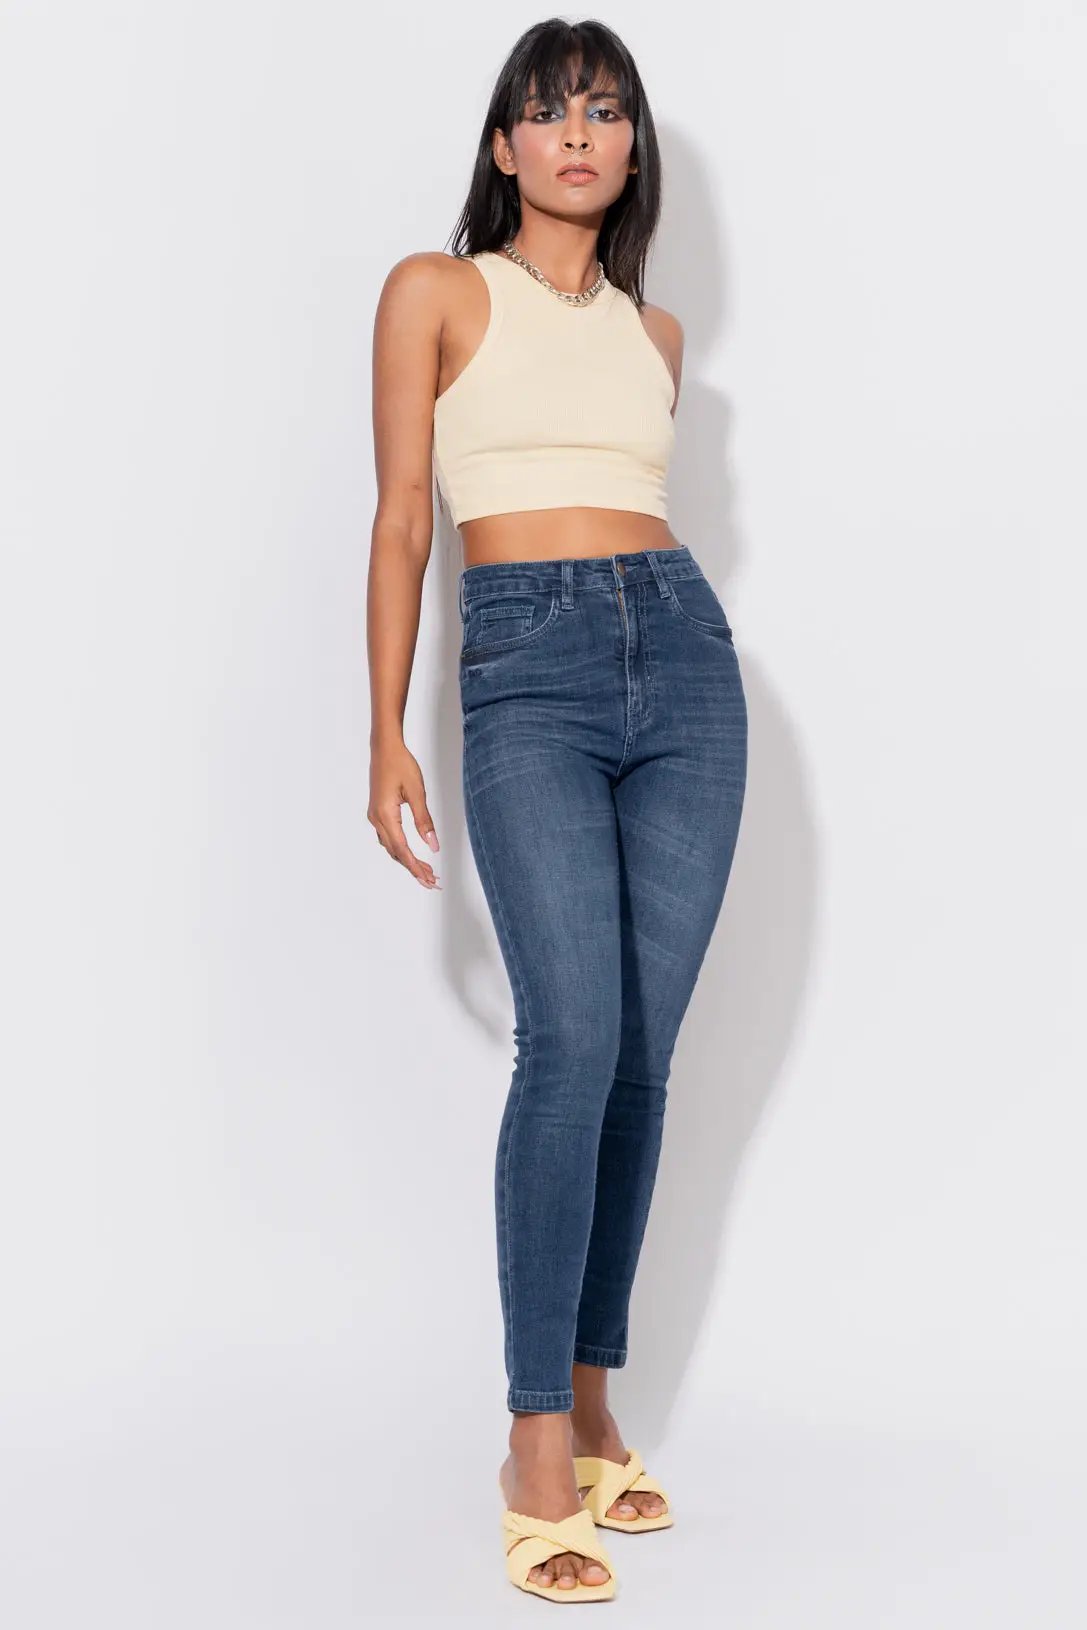 PERFECT FASHION Skinny Women Light Blue Jeans - Buy PERFECT FASHION Skinny  Women Light Blue Jeans Online at Best Prices in India | Flipkart.com